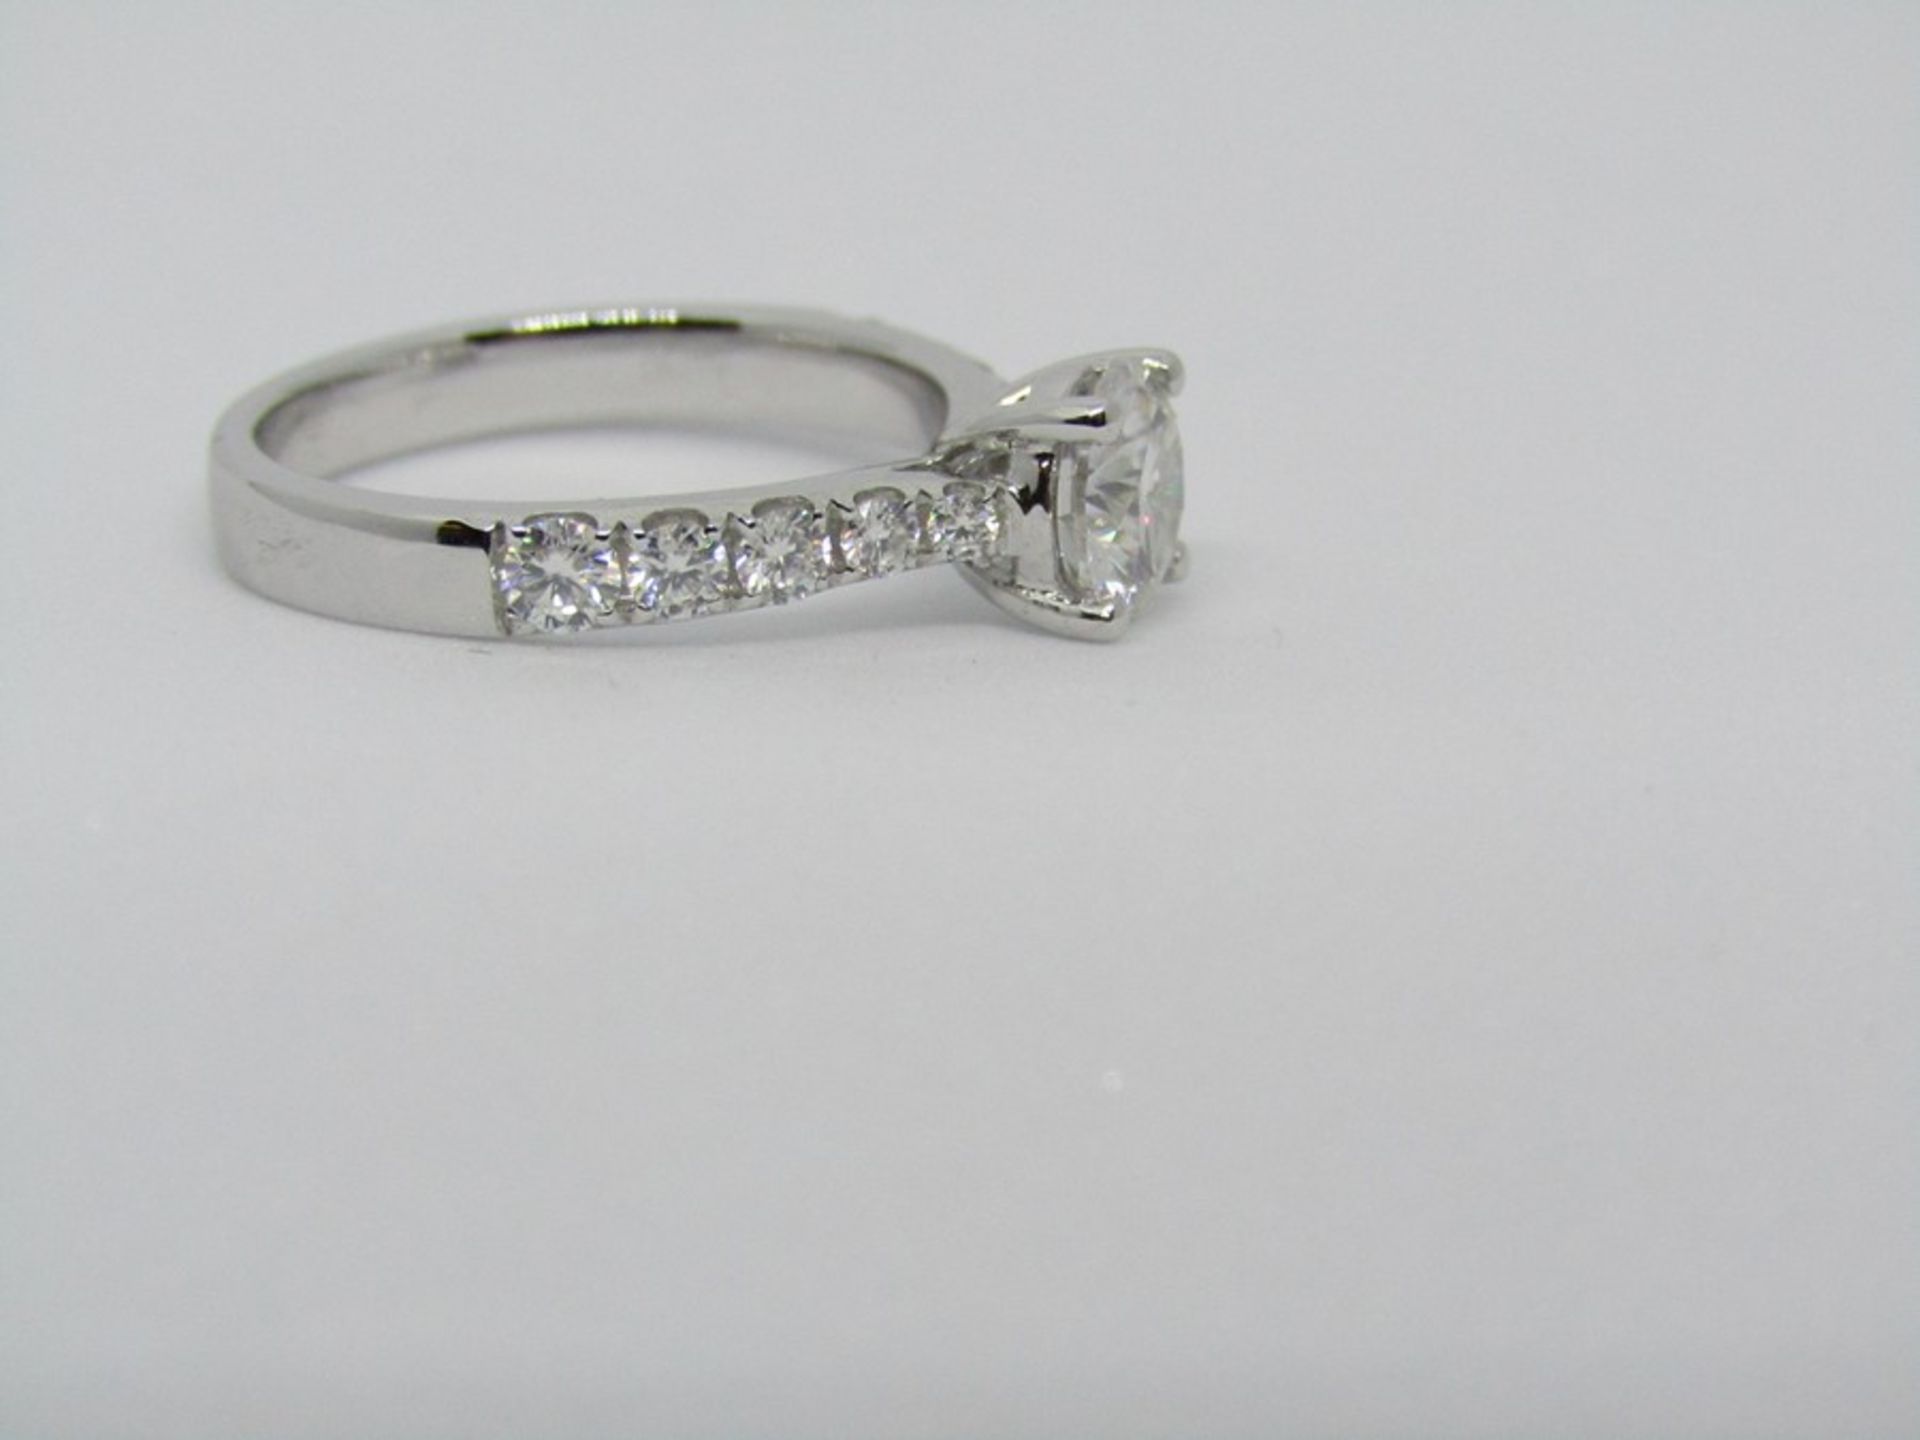 Stunning 1ct Moissanite Stone Engagement or Special Occasion Ring Set in 18ct White Gold RRP £1495 - Image 2 of 4